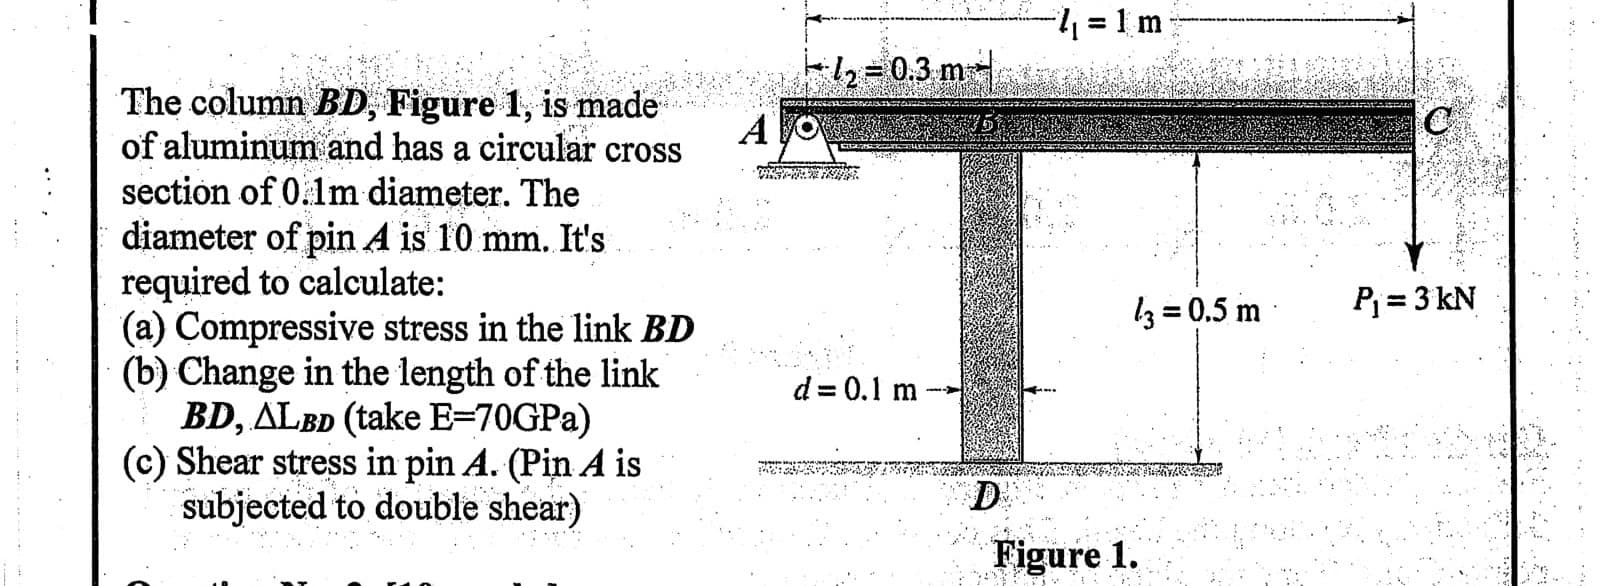 = 1 m
%3D
-2 = 0.3 m
The column BD, Figure 1, is mnade
of aluminum and has a circular cross
section of 0.1m diameter. The
= diameter of pin A is 10 mm. It's
required to calculate:
(a) Compressive stress in the link BD
(b) Change in the length of the link
BD, ALBD (take E=70GPA)
(c) Shear stress in pin A. (Pin A is
subjected to double shear)
A
3 = 0.5 m
P = 3 kN
d = 0.1 m
D
.. ..
